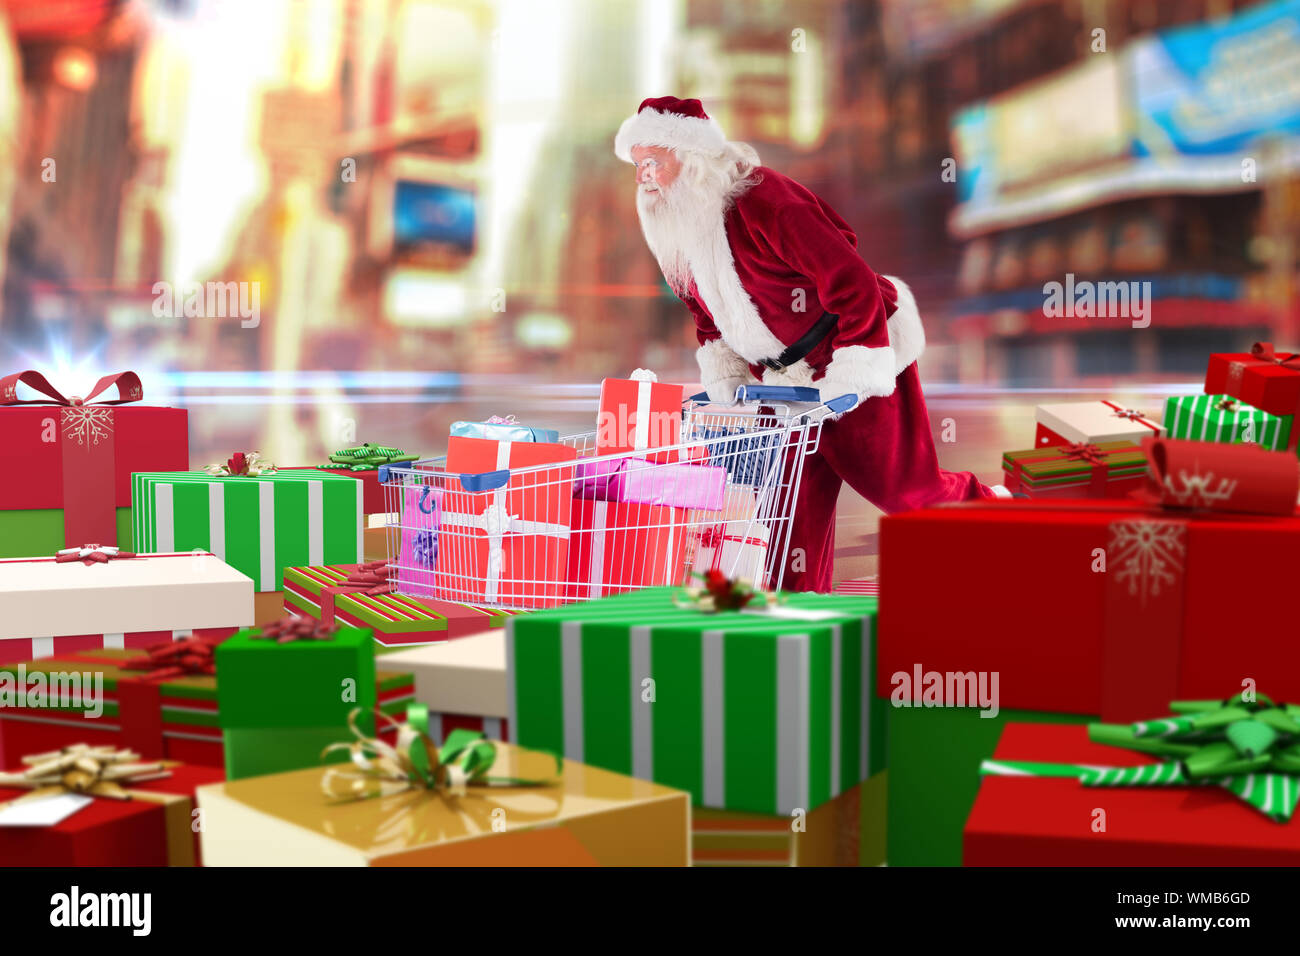 Santa delivering gifts from cart against blurred new york street Stock Photo